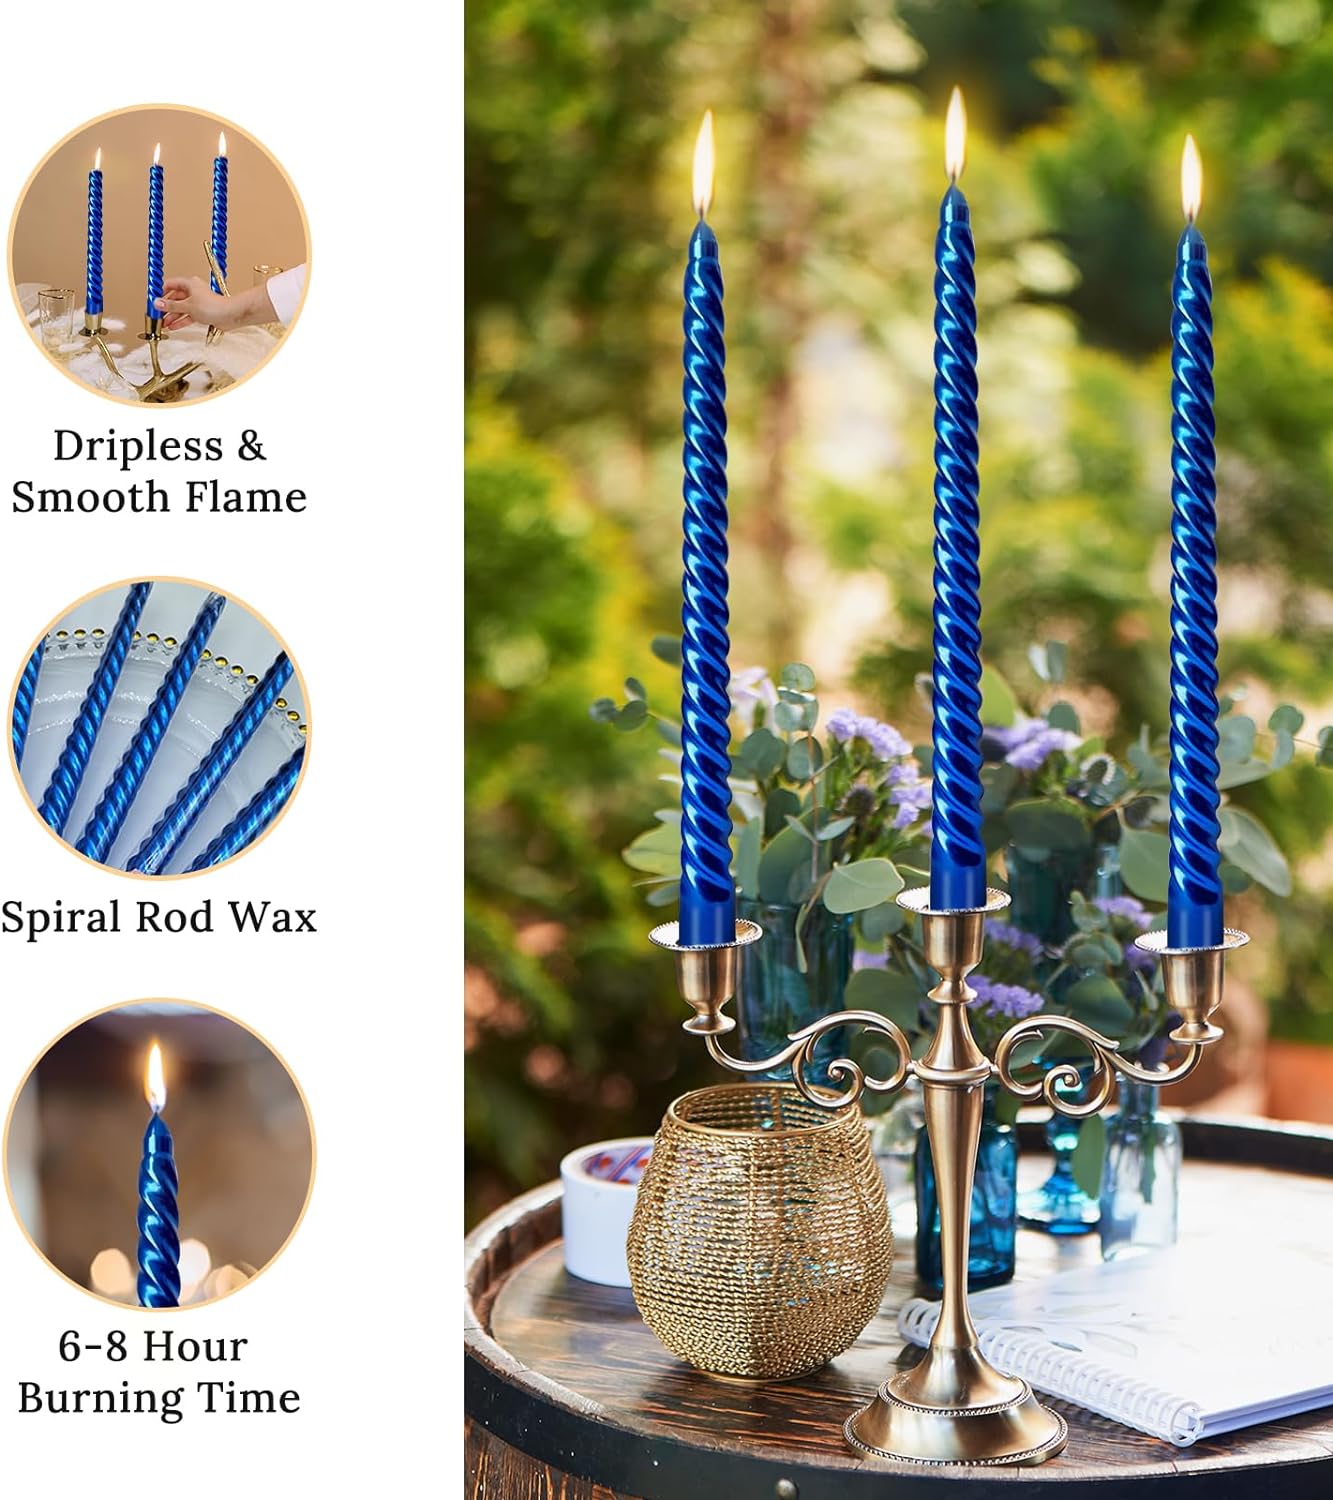 AuraDecor Spiral Taper Candles Set of 10, Unscented Dripless Candlesticks for Home Decor, Dinner, 10 Inch